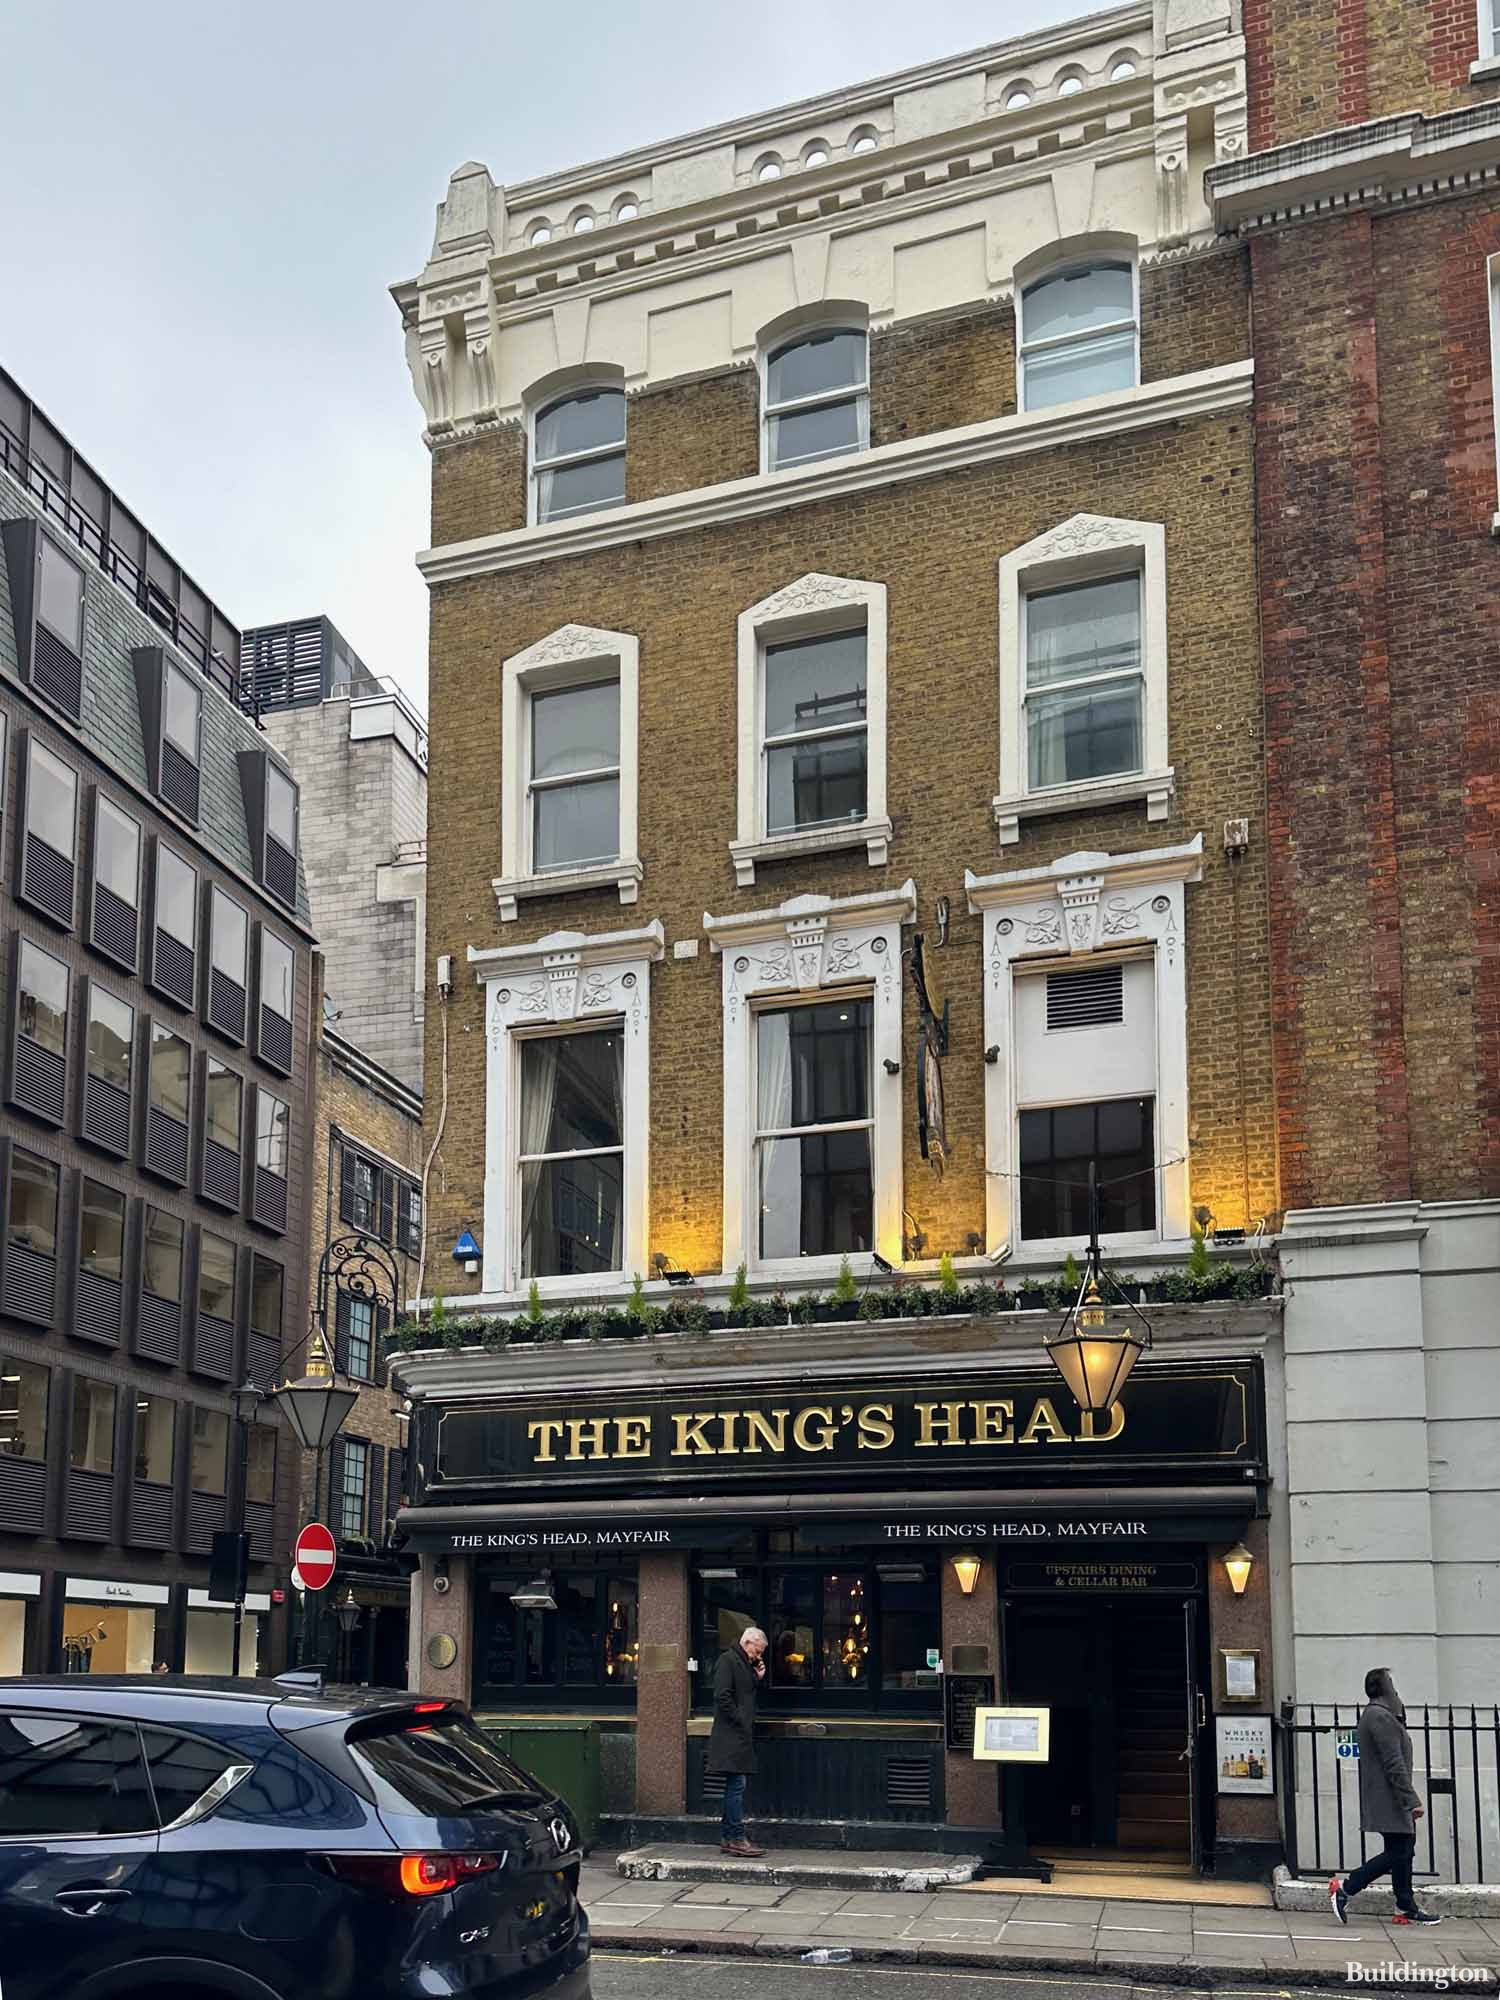 The King's Head pub building on the corner of Stratton and Albemarle Street in Mayfair, London W1